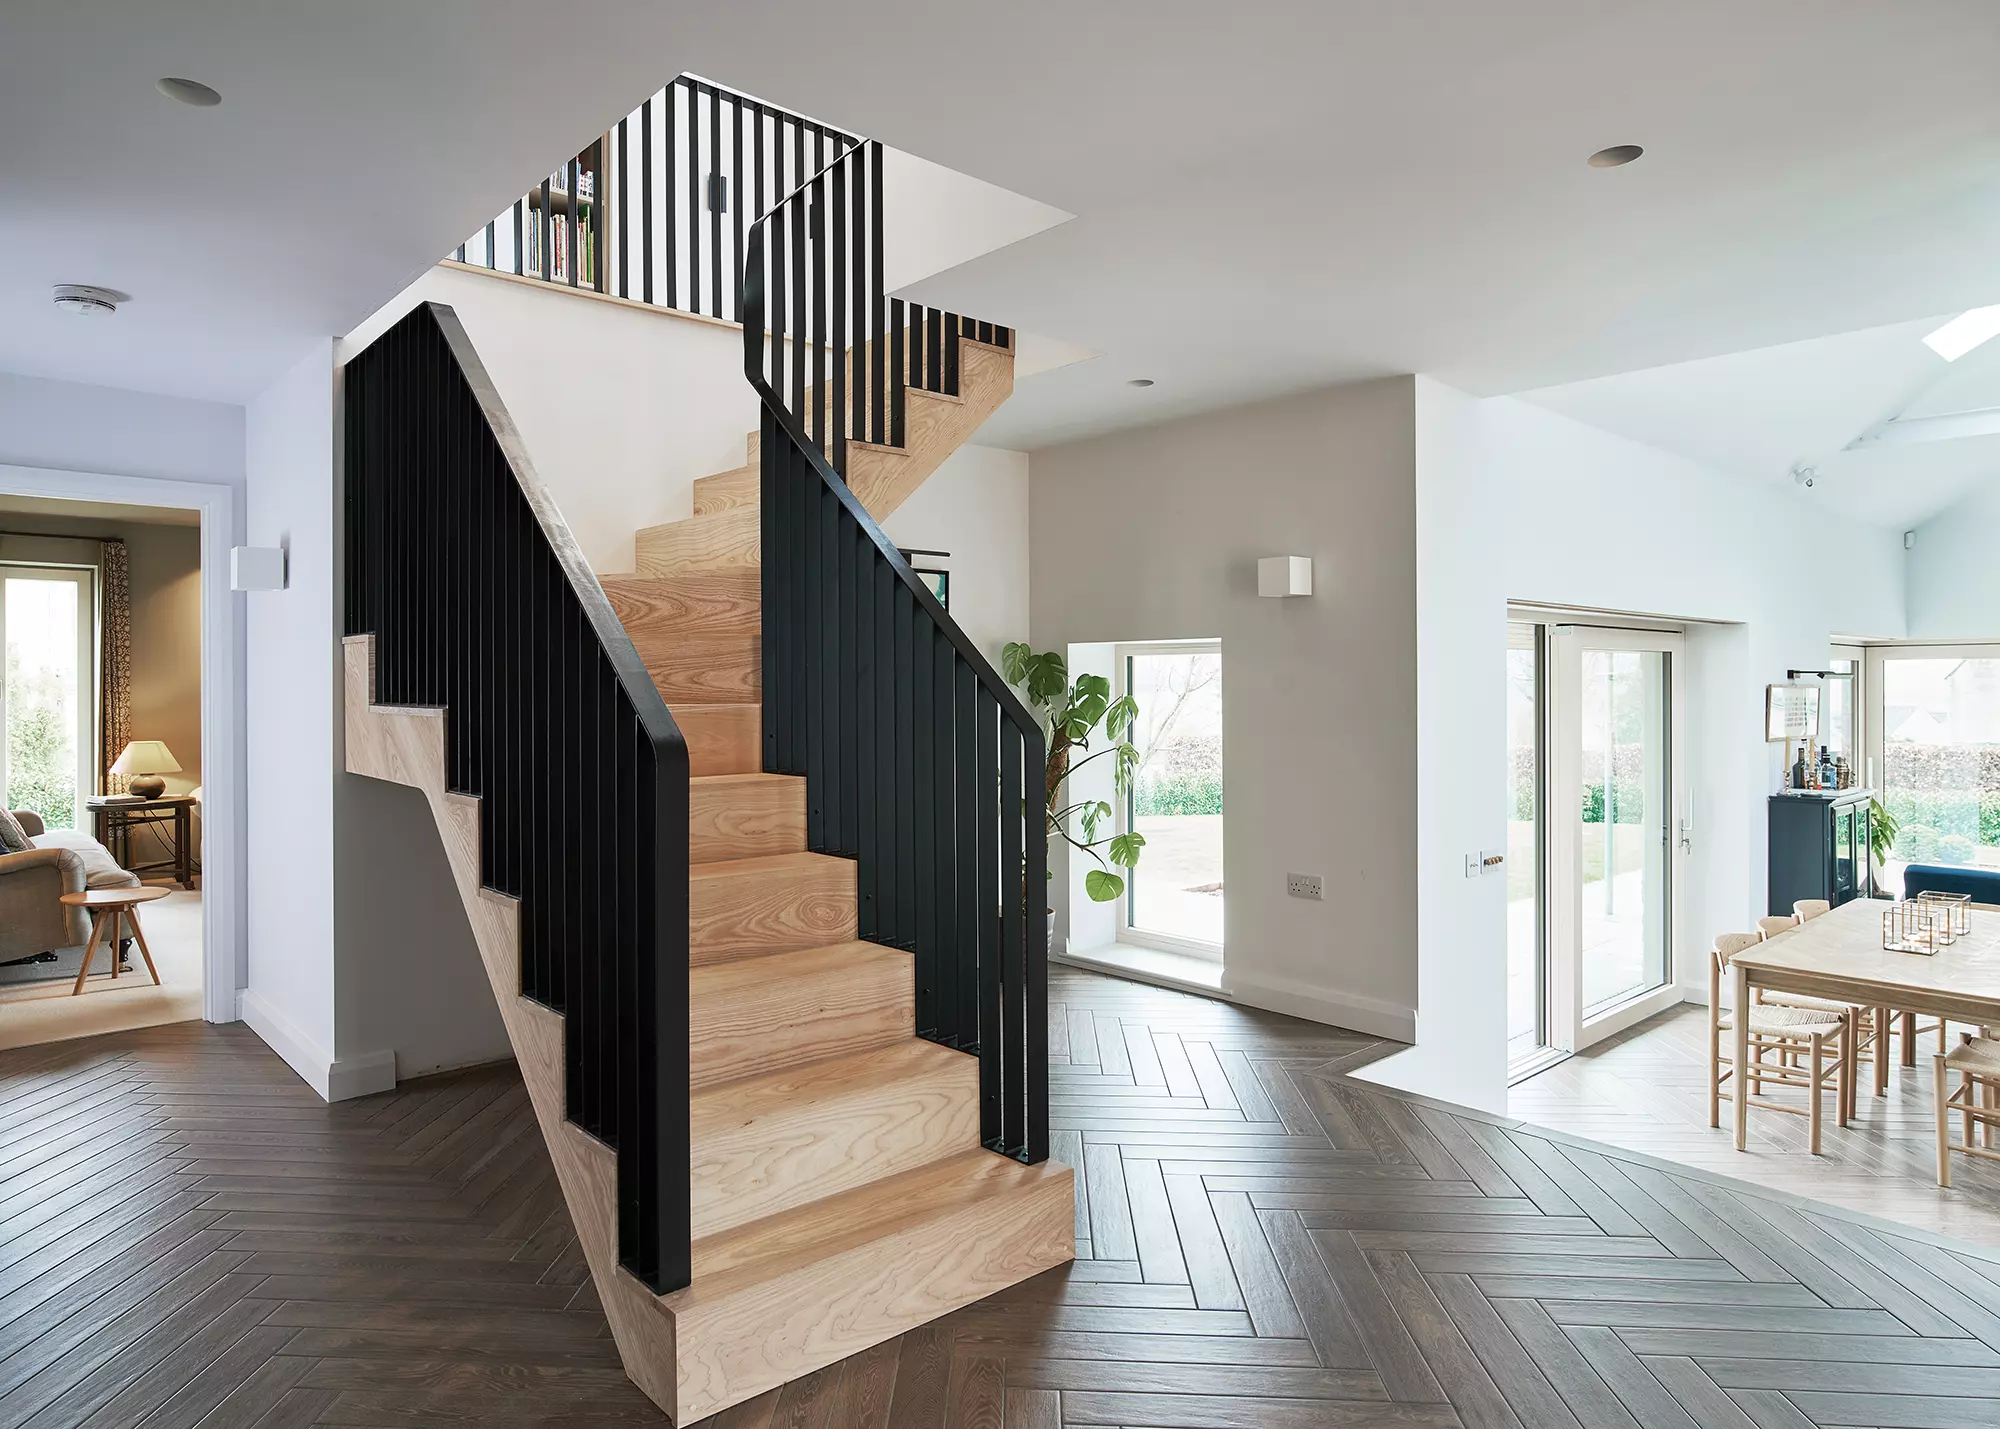 26 Staircase Ideas: Plan Staircase to Your Design How Perfect 